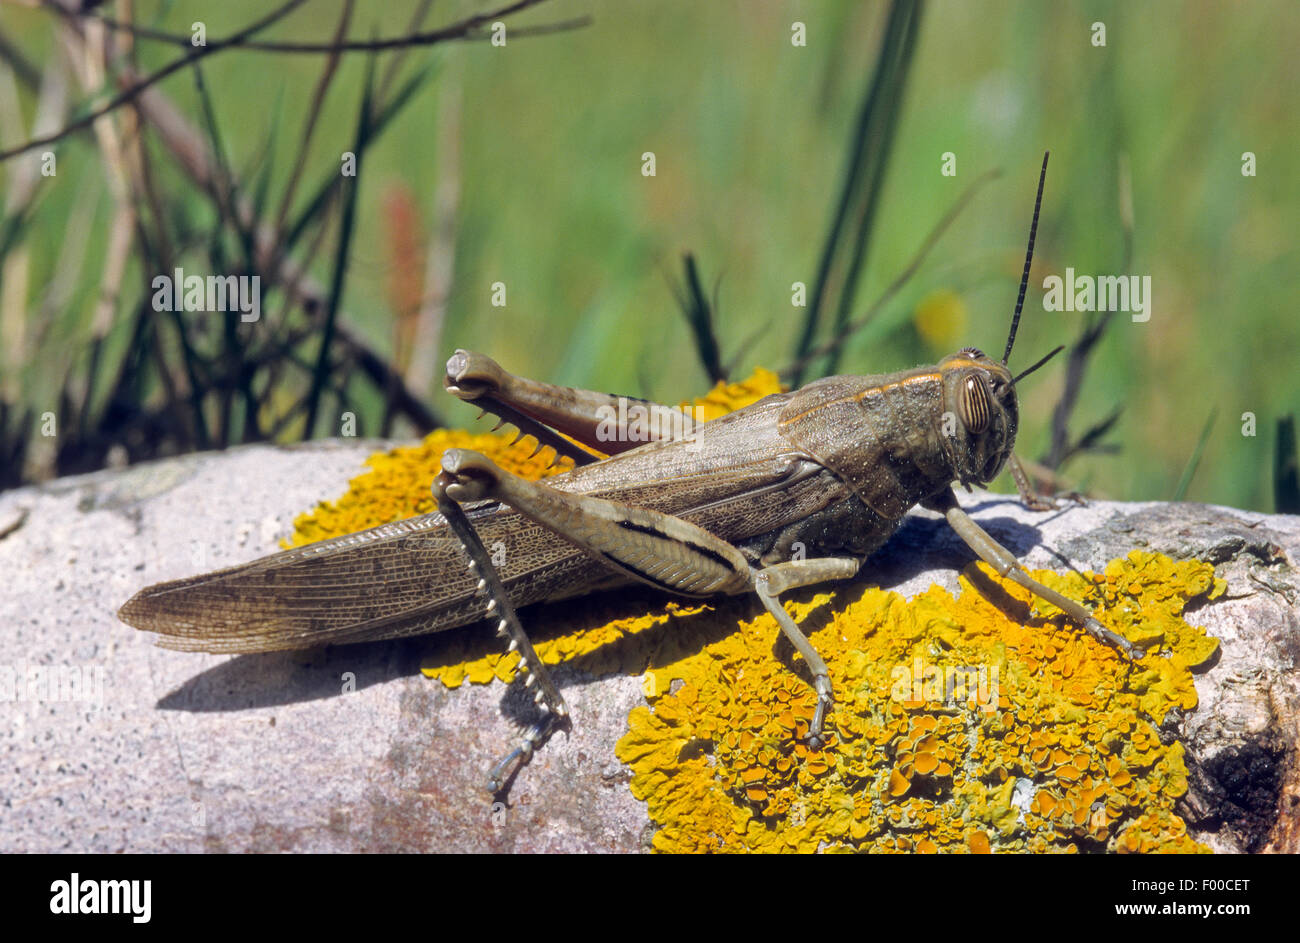 Egyptian grasshopper, Egyptian Locust (Anacridium aegyptium, Anacridium aegypticum), sits on a stone covered with lichens Stock Photo